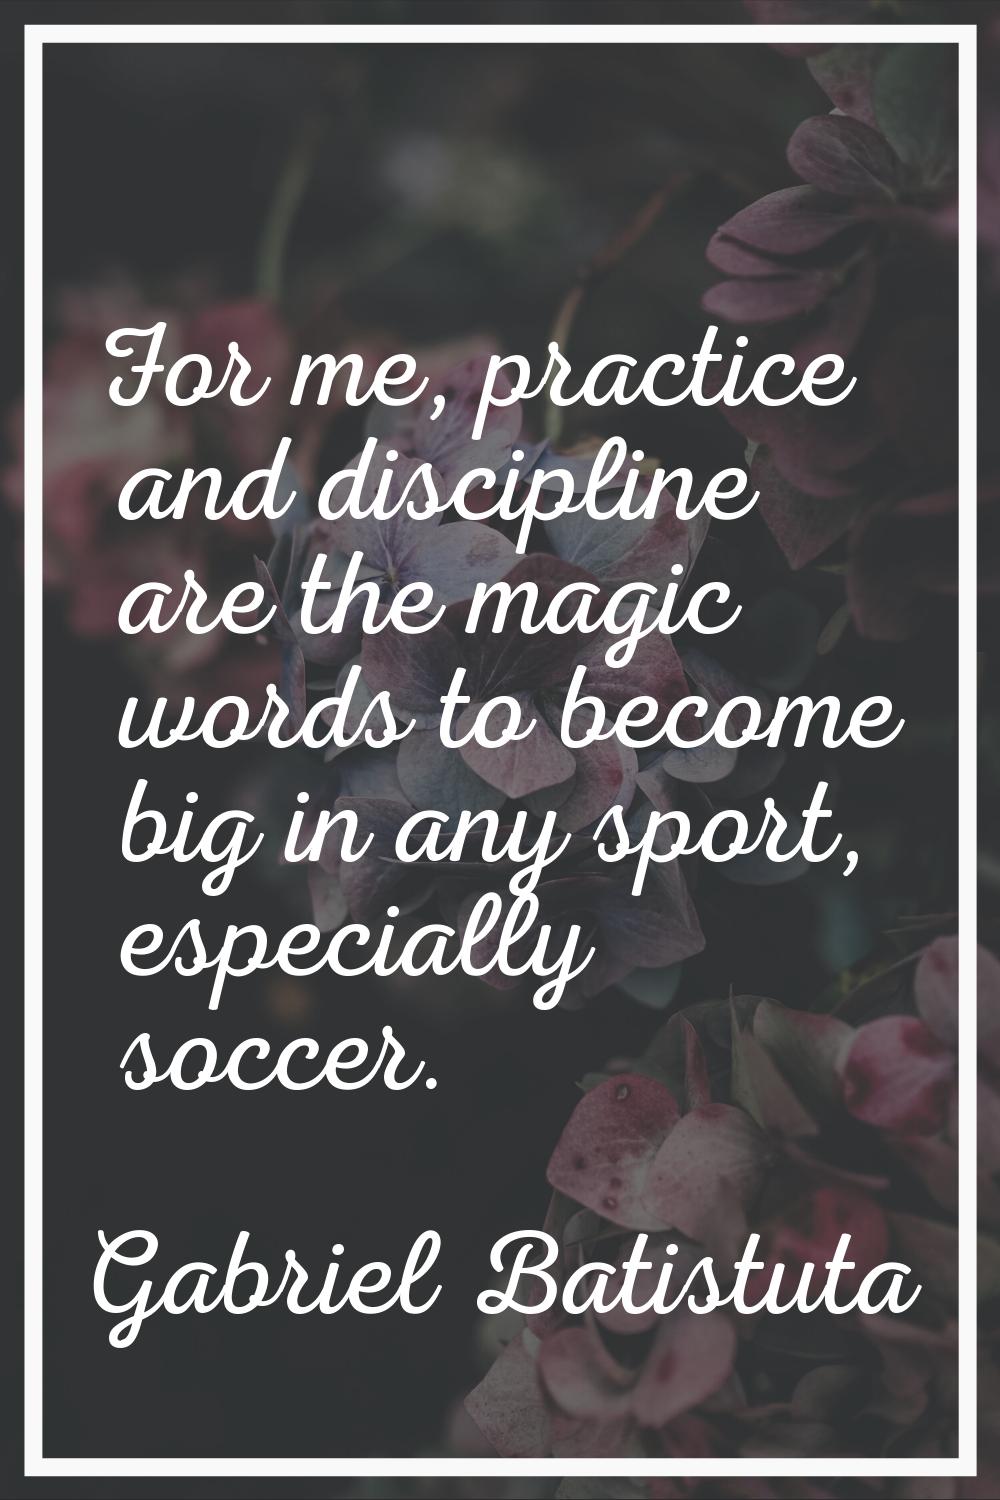 For me, practice and discipline are the magic words to become big in any sport, especially soccer.